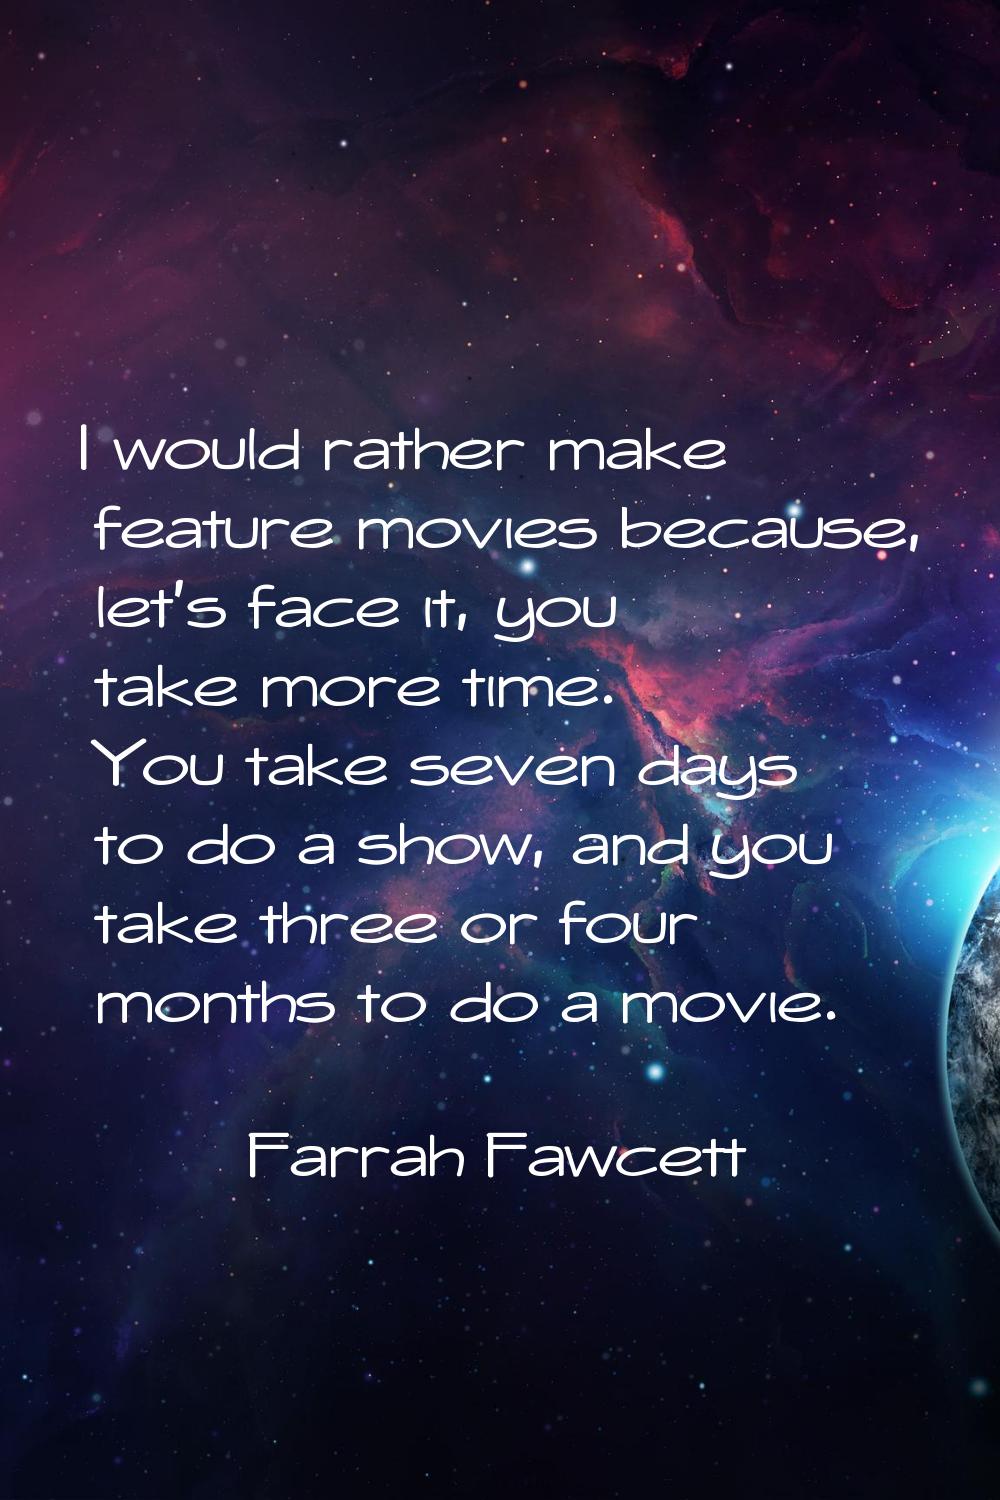 I would rather make feature movies because, let's face it, you take more time. You take seven days 